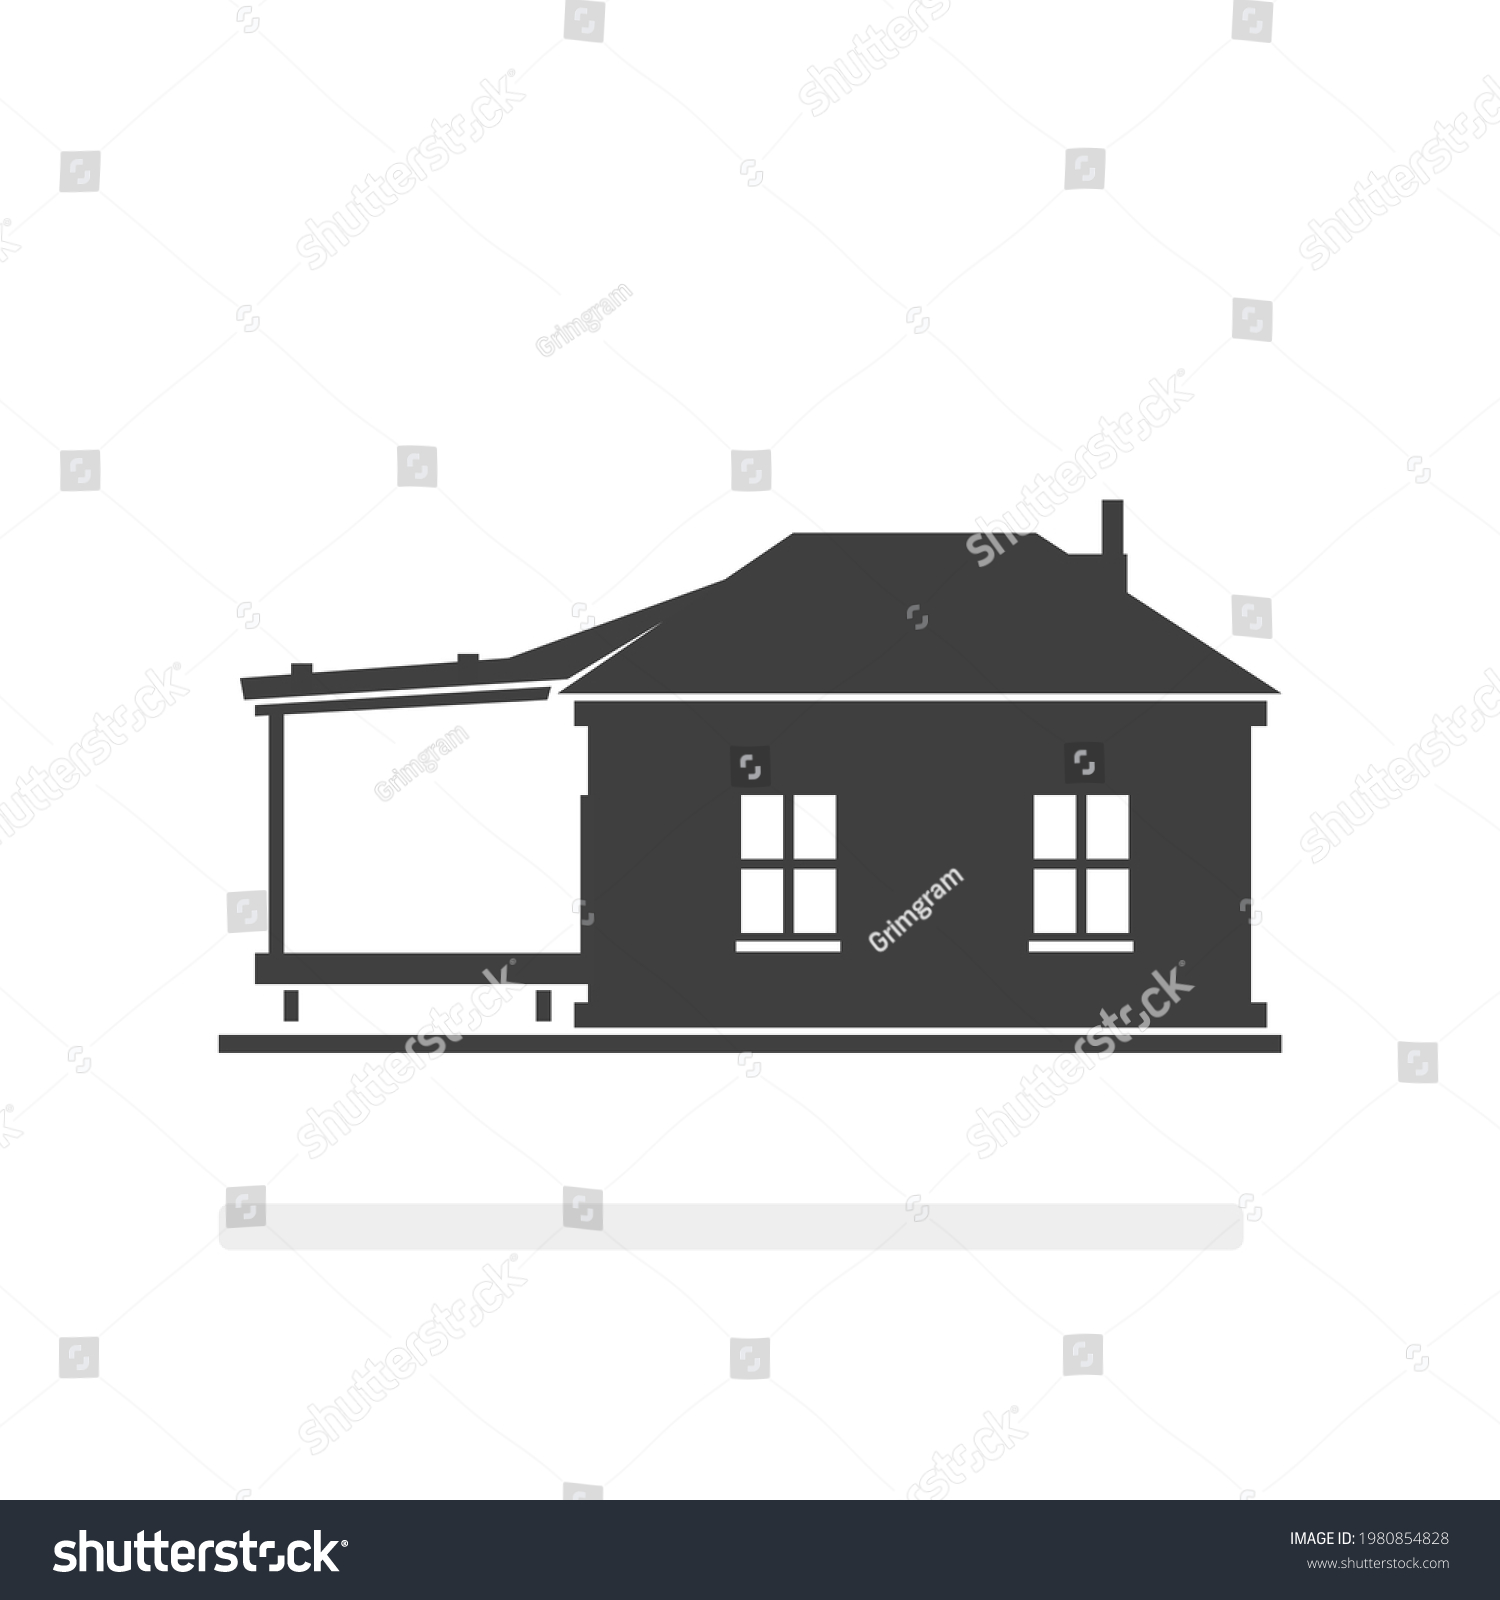 SVG of Cabin Rental Bed and Breakfast Icon - Silhouette Vector Illustration Art svg